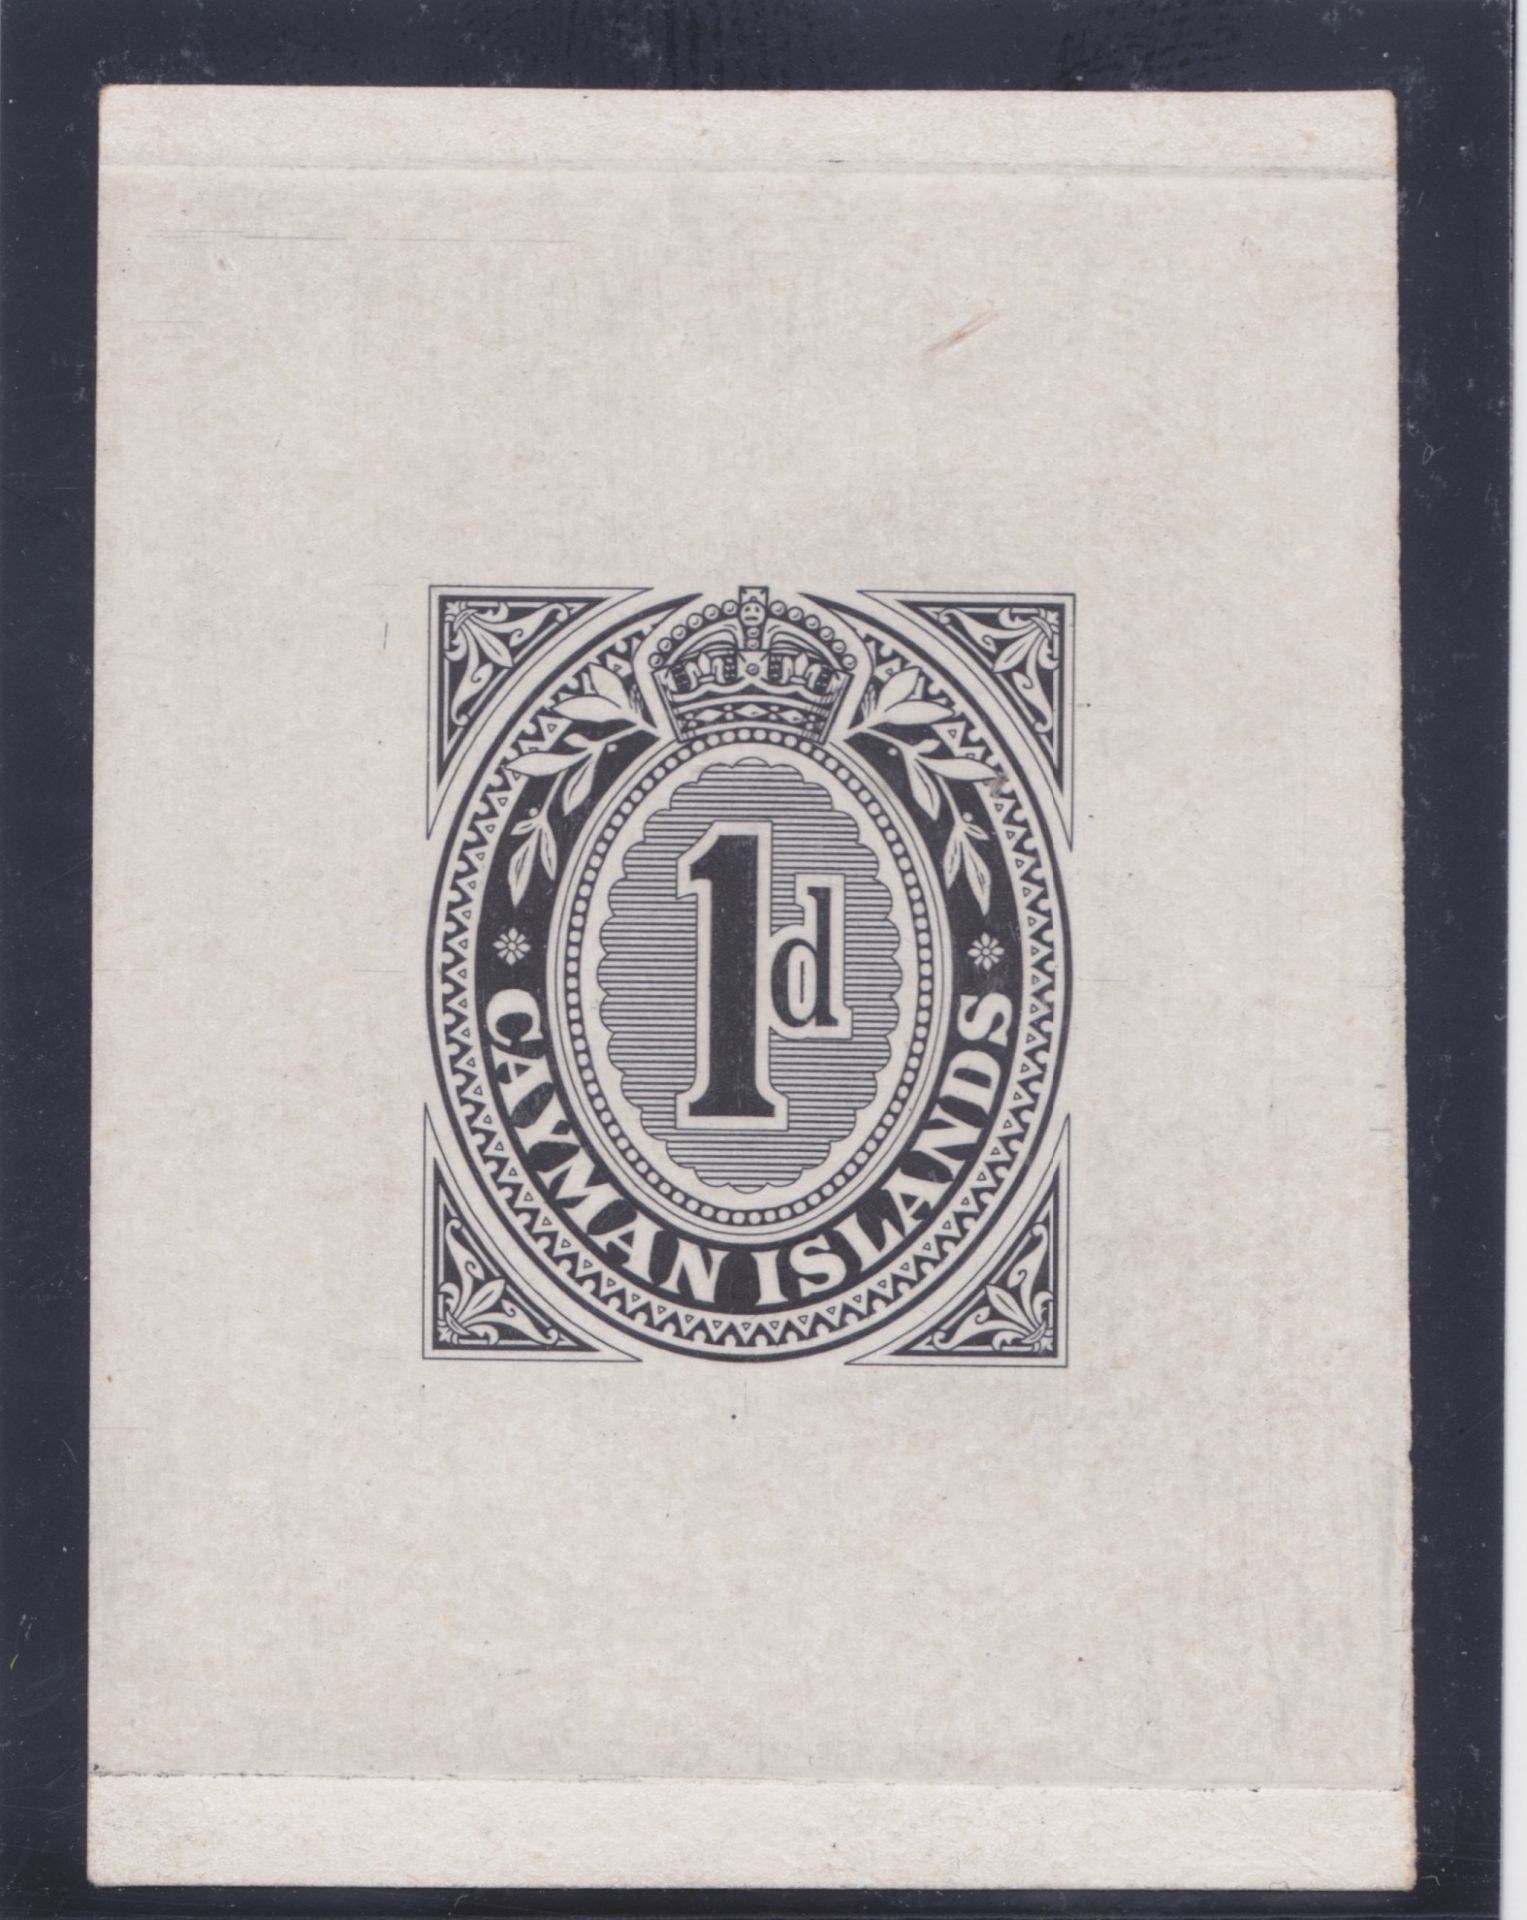 CAYMAN ISLANDS 1909 - 1d Postal stationery postcard and envelope stamp Die Proof in black on thin